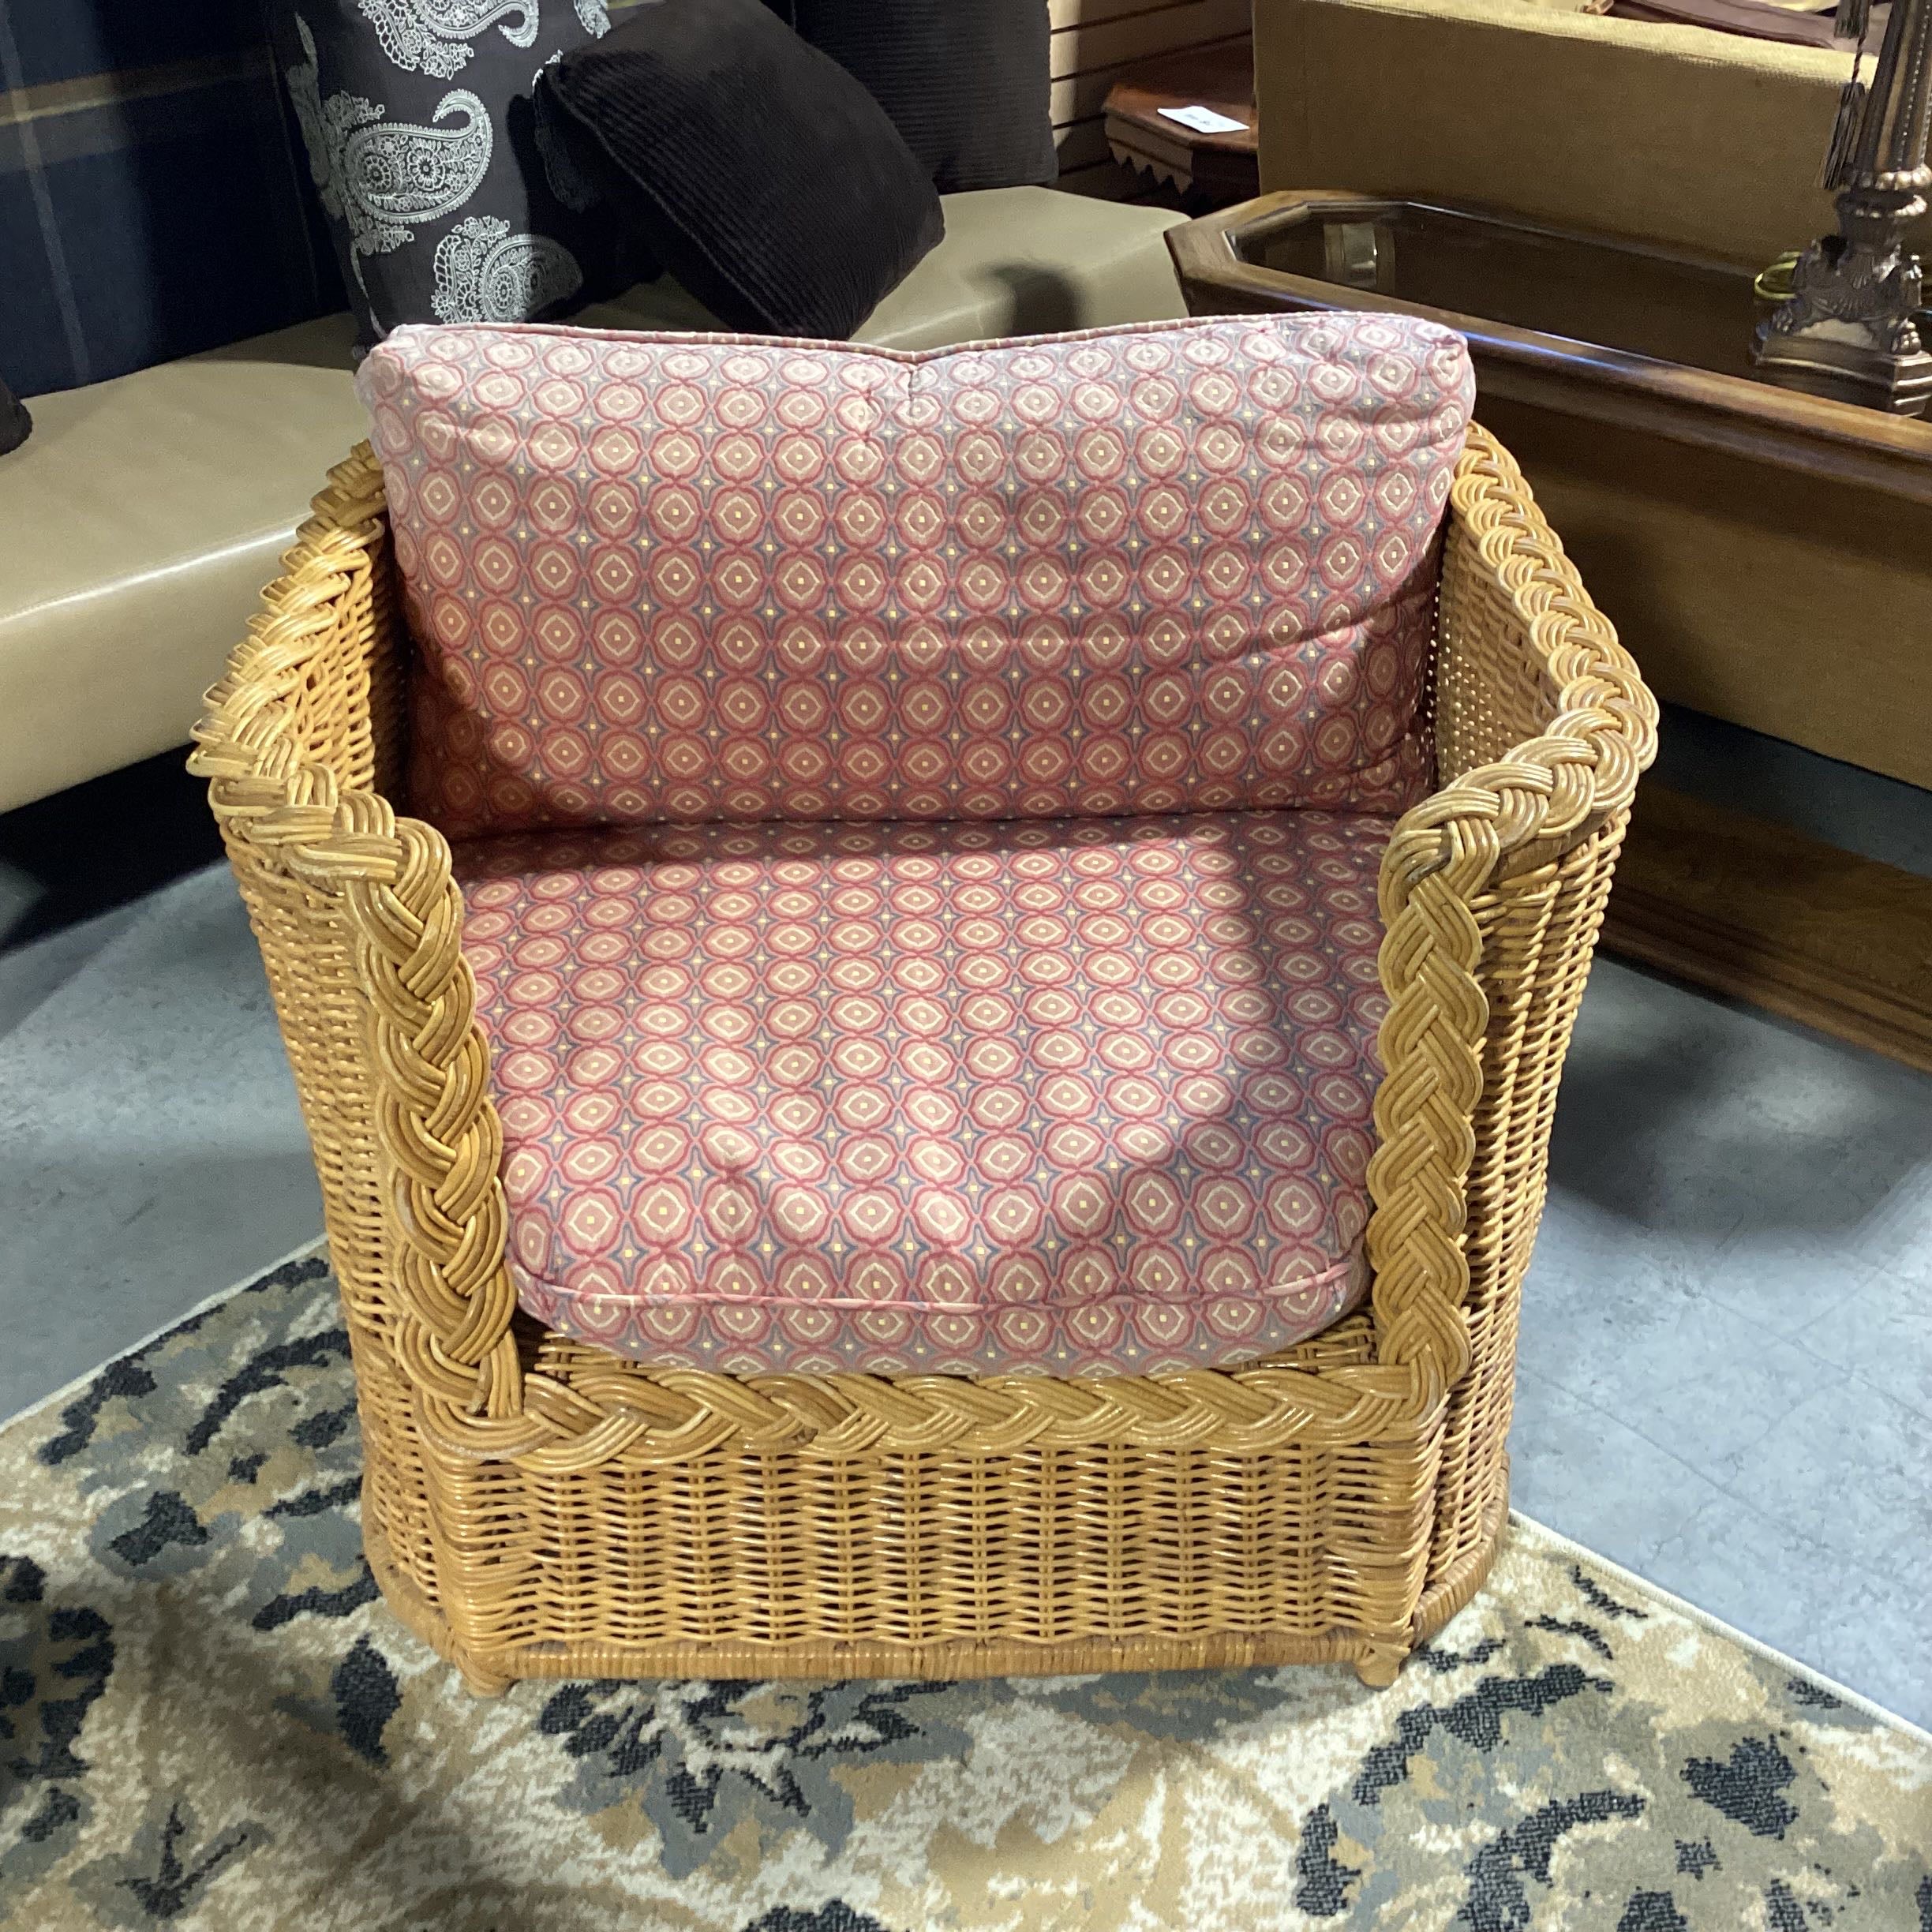 Rattan Woven Braided with Cushions Basket Style Chair